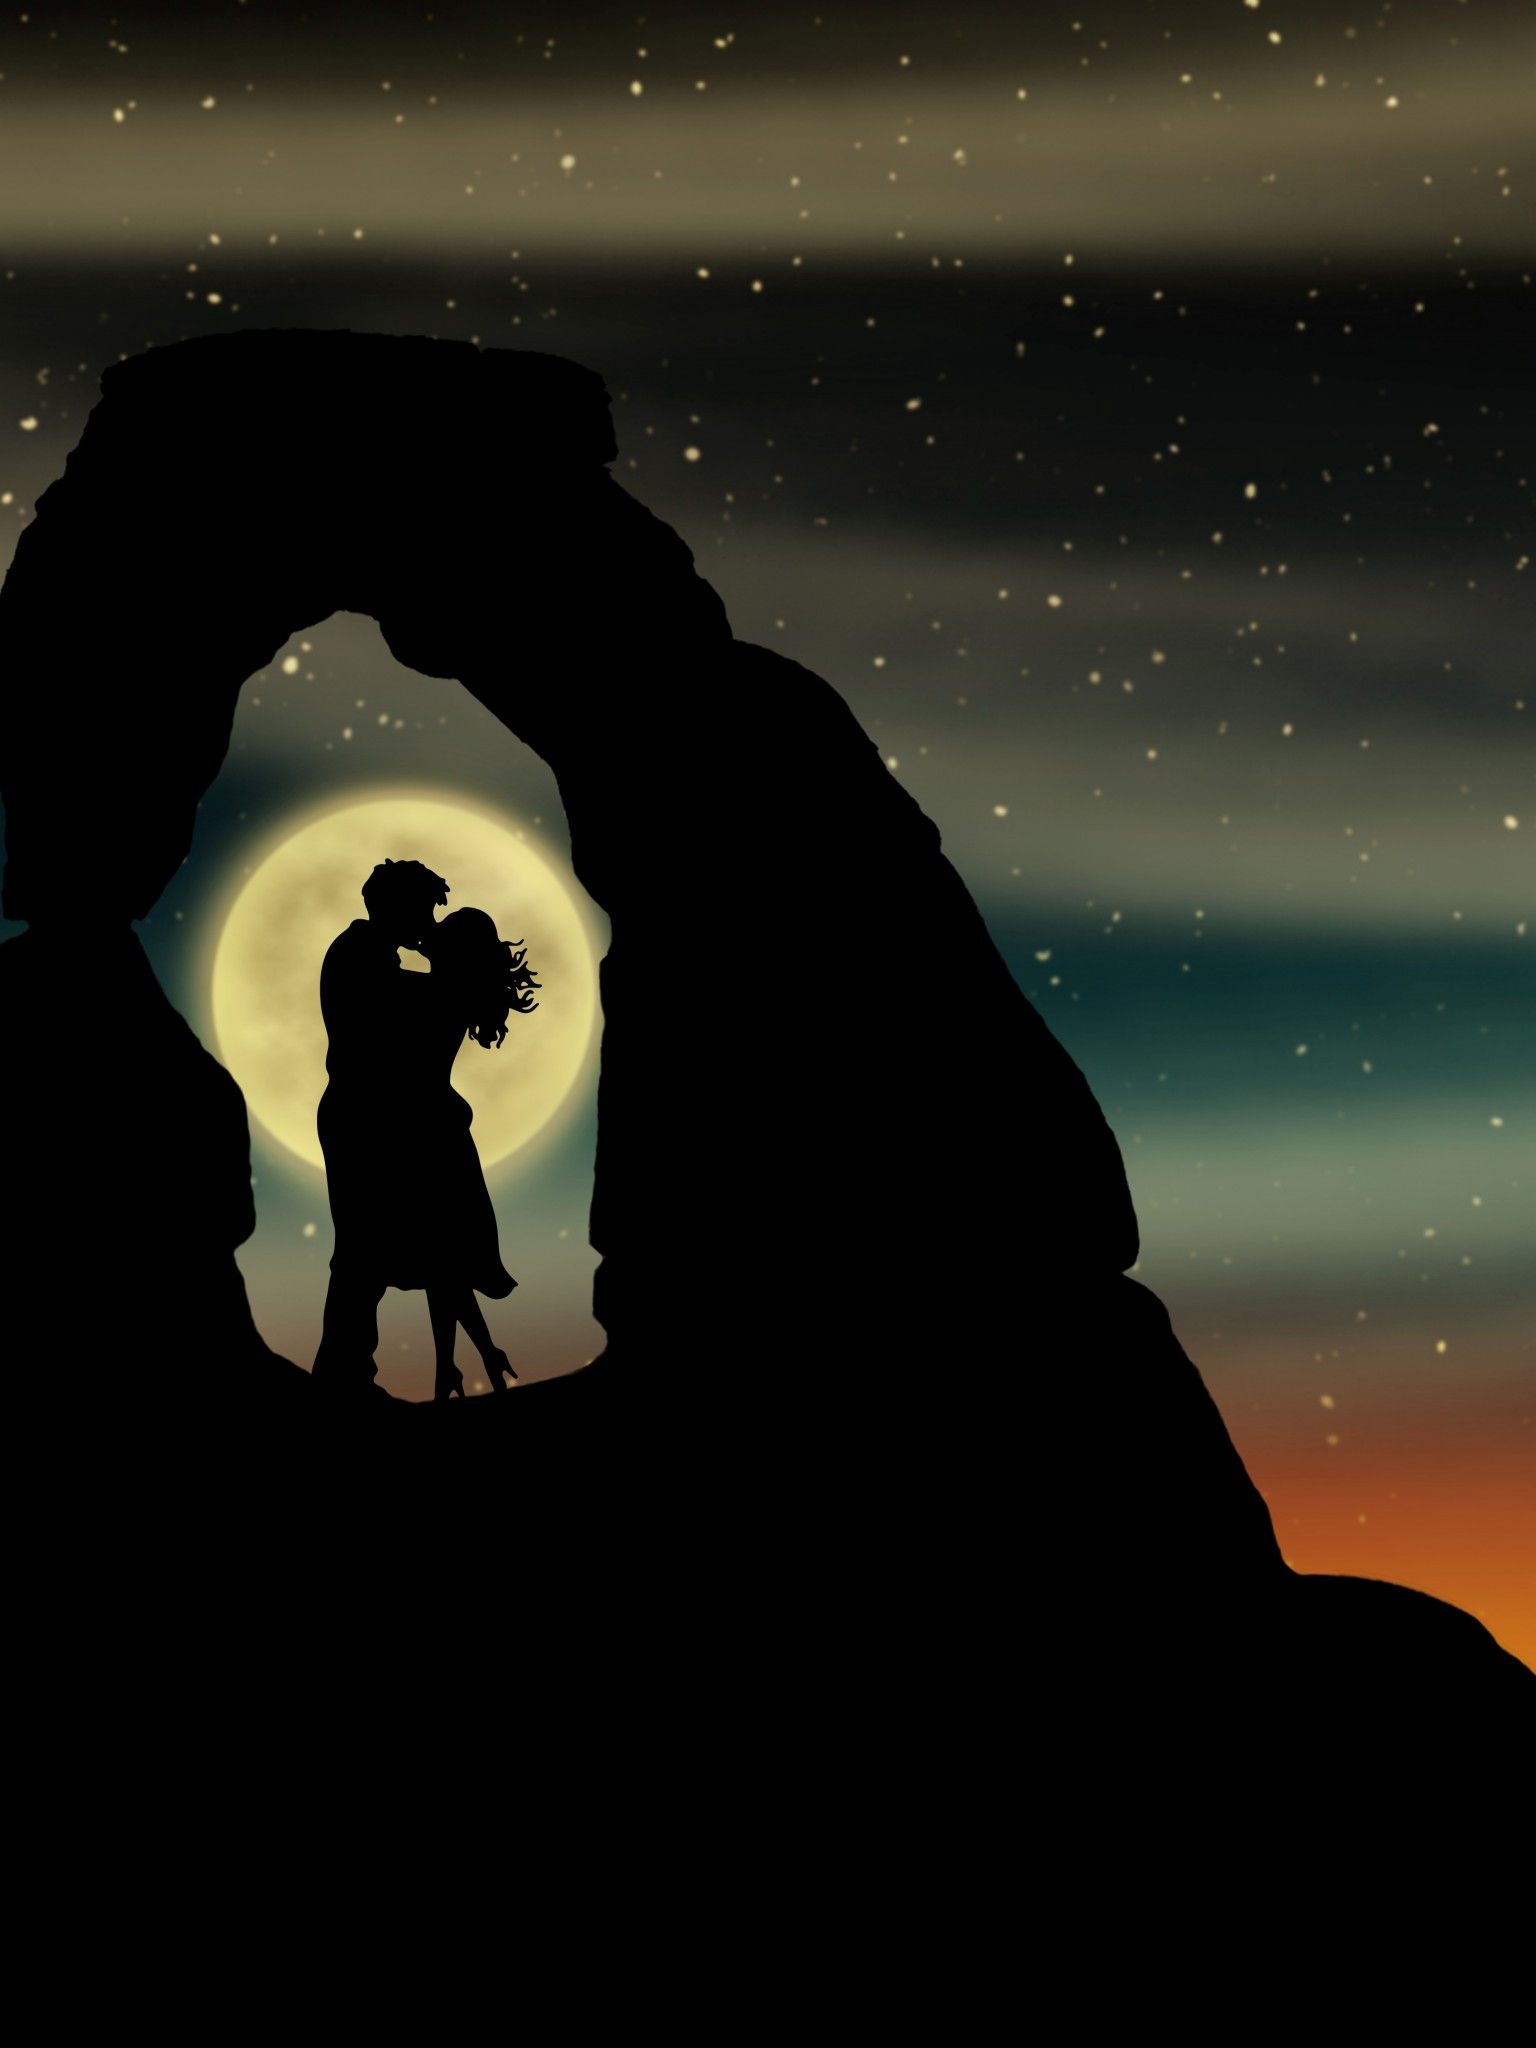 Wallpaper Couple, Romantic Kiss, Moon, Silhouette, Lovers, 5K, Black Dark,. Wallpaper For IPhone, Android, Mobile And Desktop